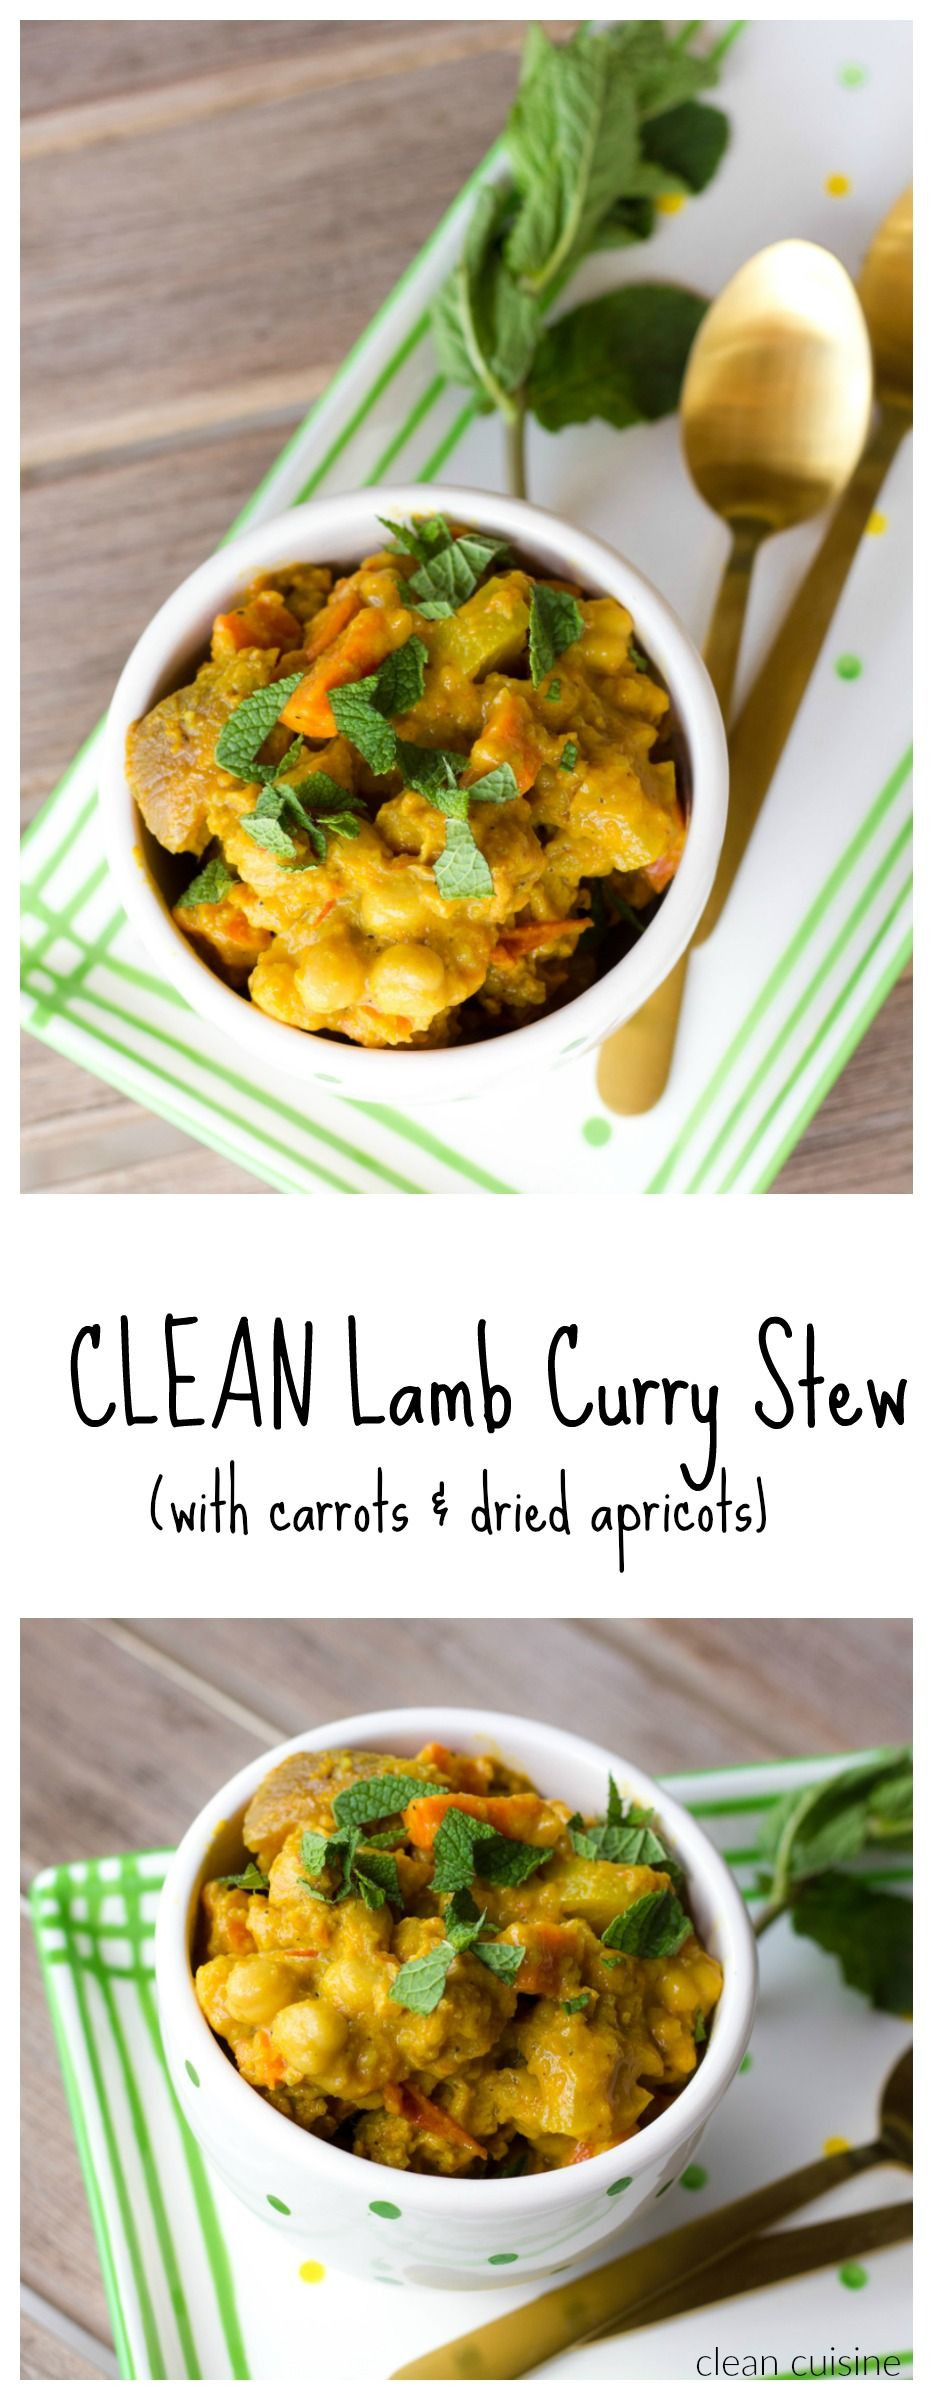 Lamb Curry Stew
 Clean Lamb Curry Stew Recipe with omega 3 s and LOTS of